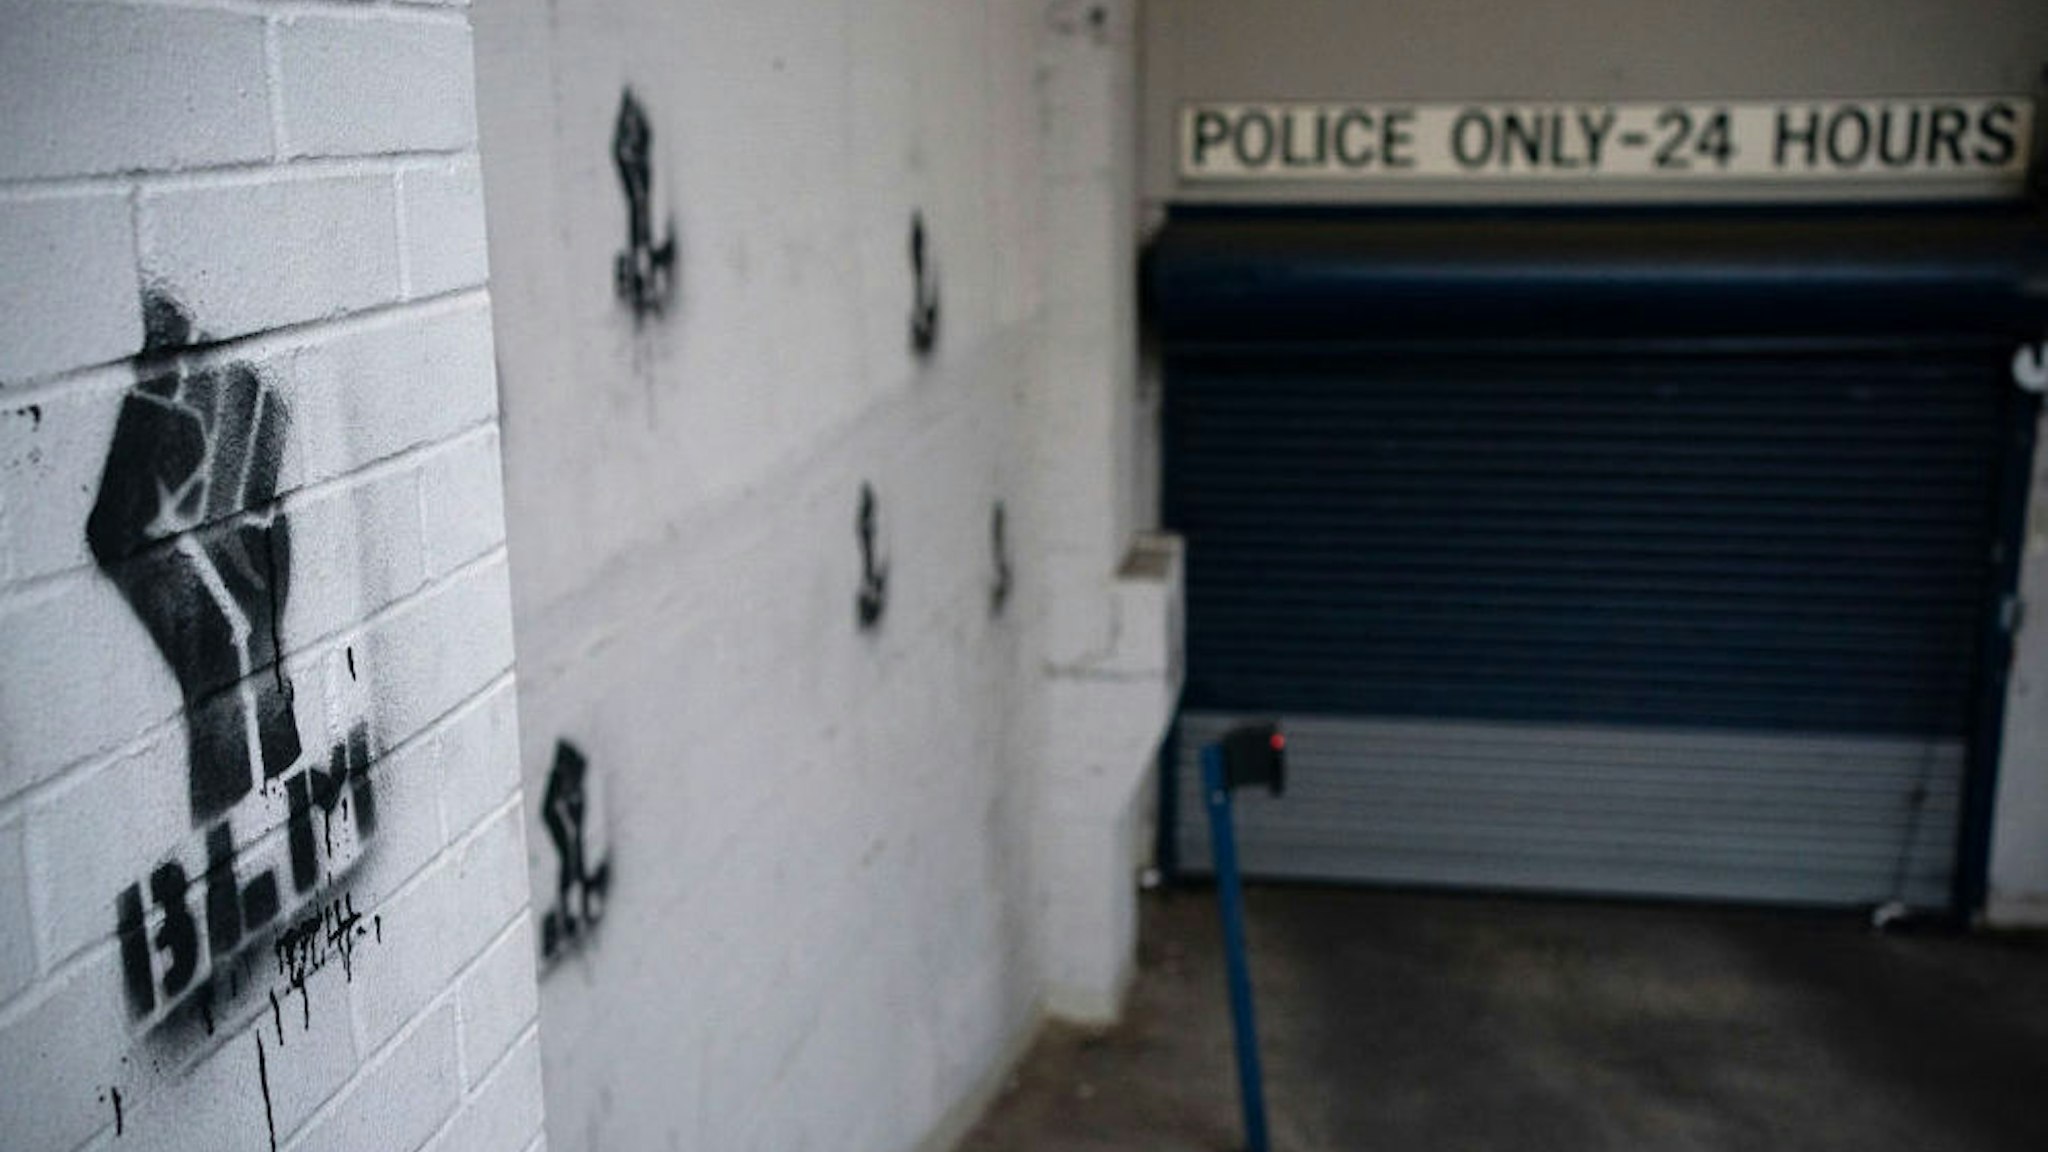 Black Lives Matter graffiti is painted at entrance to the Seattle Police Department's East Precinct, which has been boarded up and protected by fencing as demonstrators hold a rally and teach-in nearby on June 8, 2020 in Seattle, Washington.